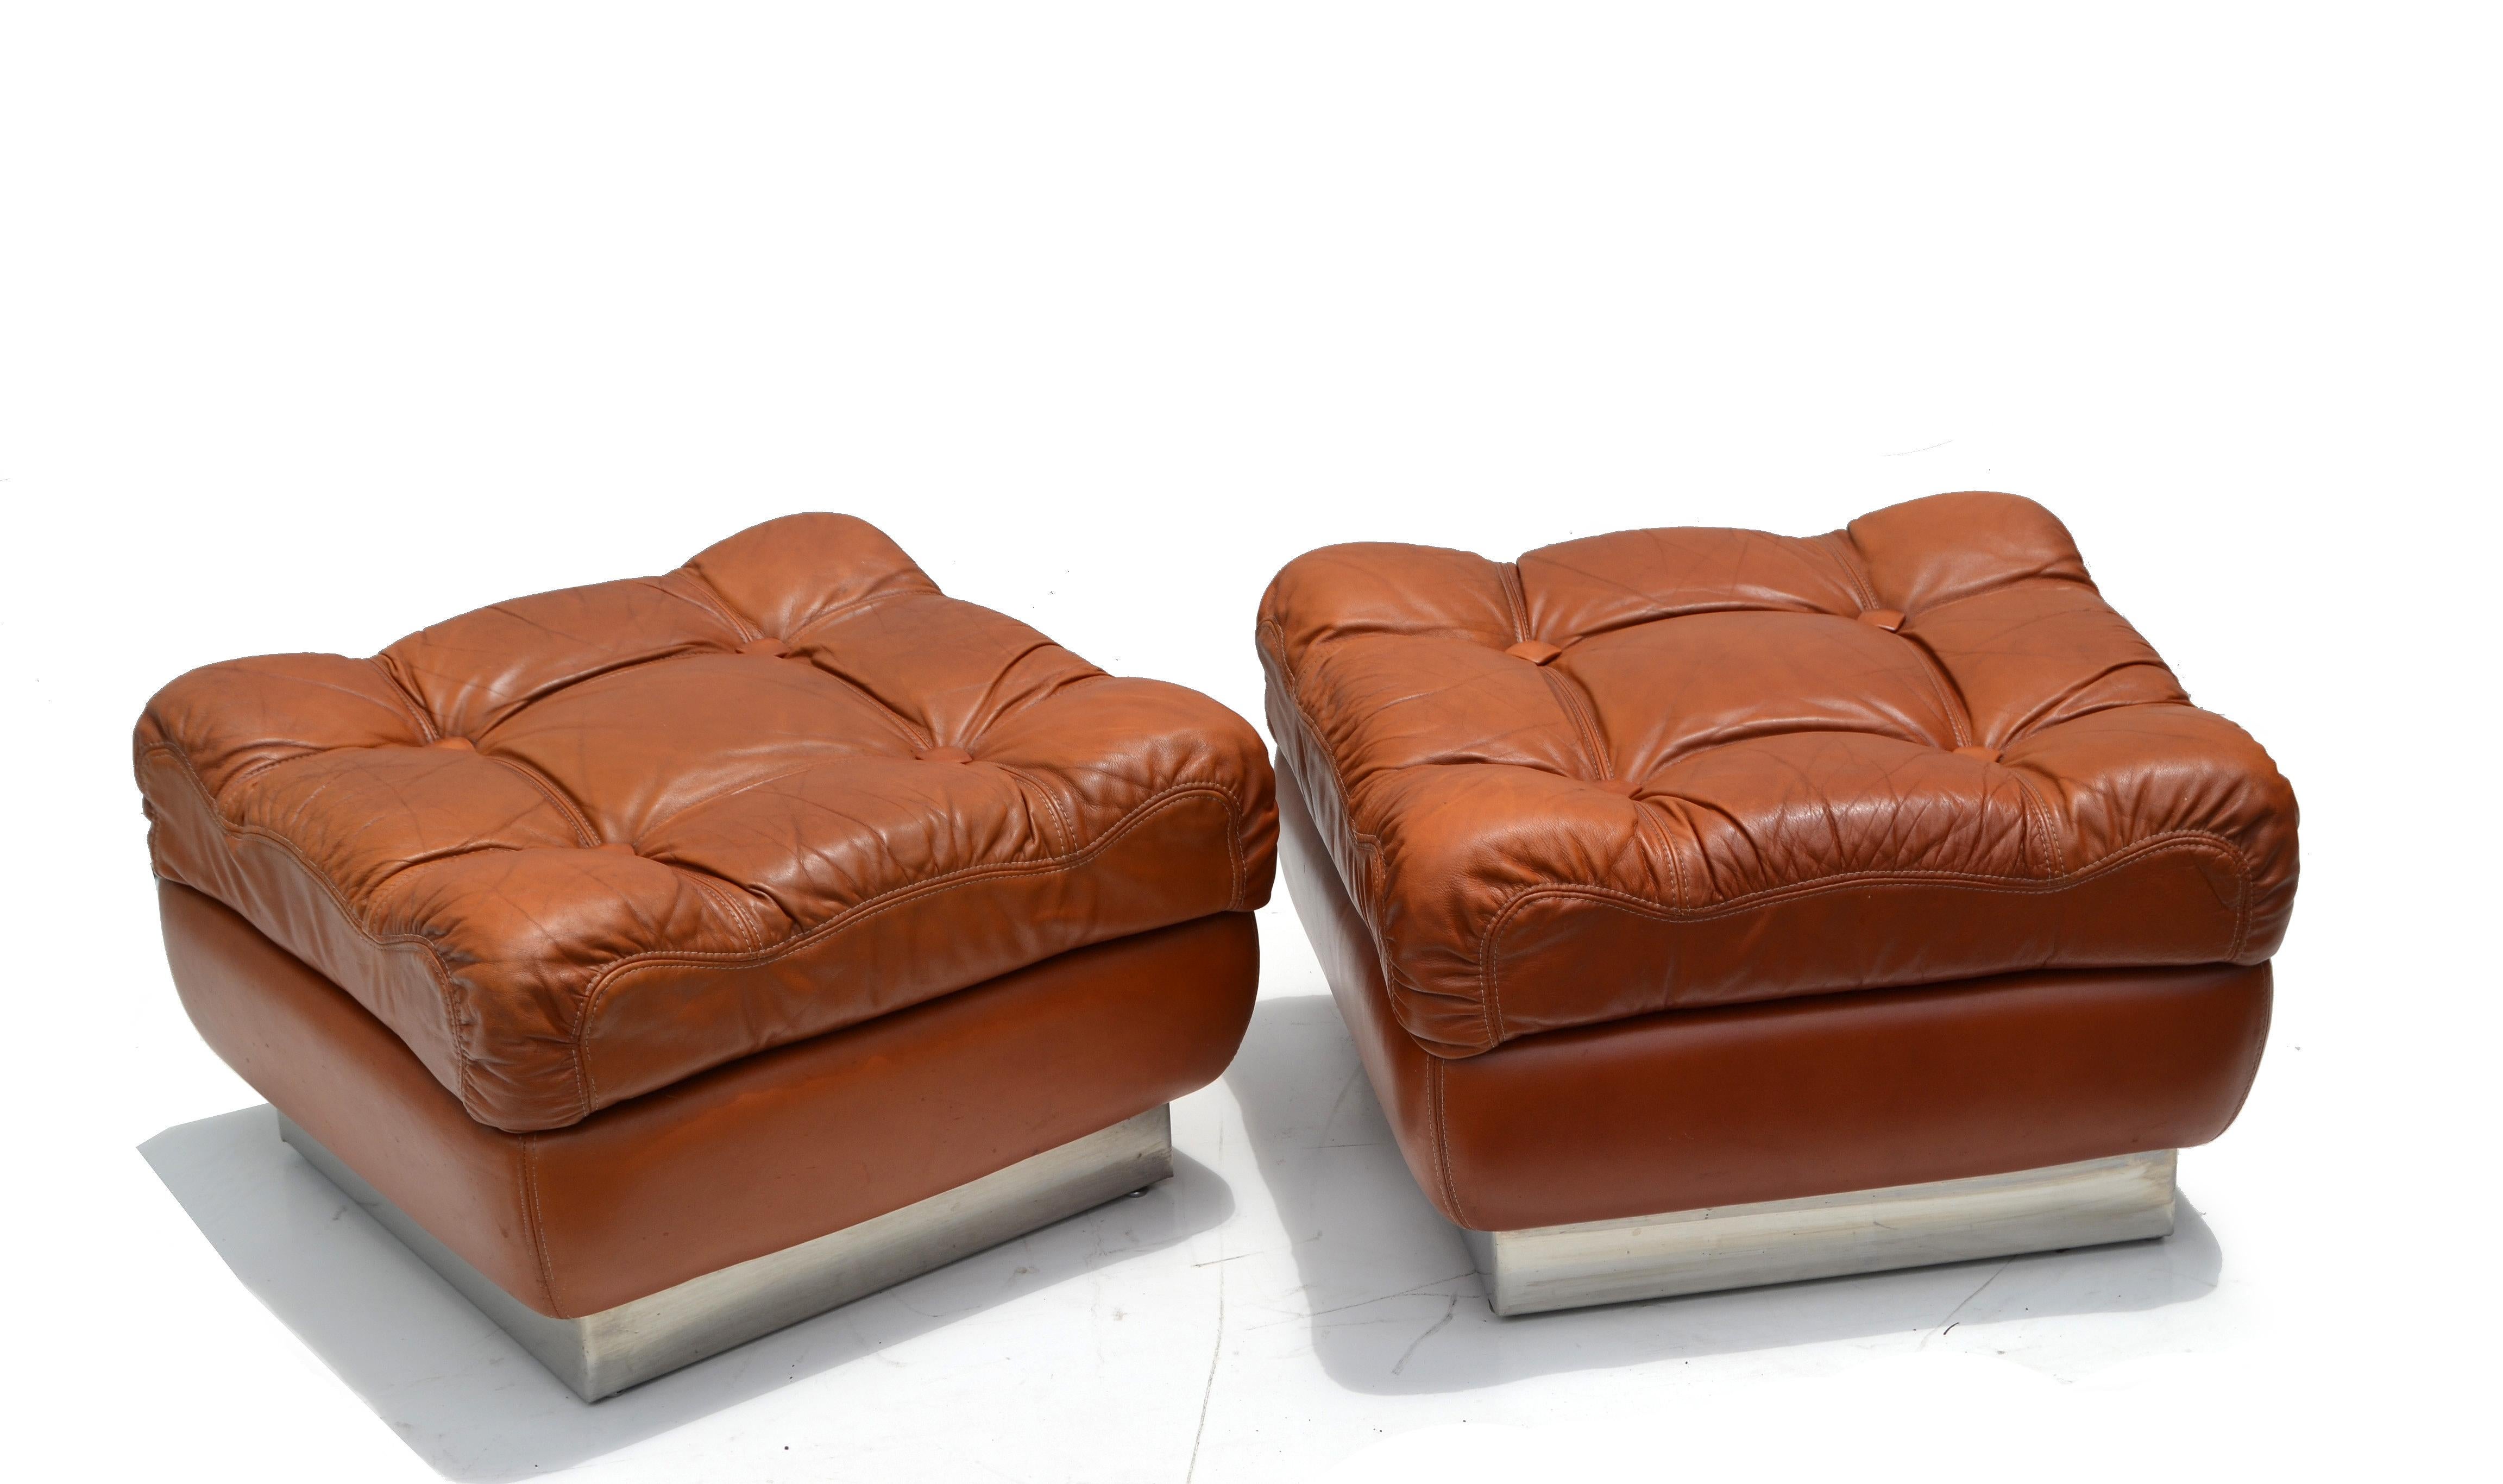 Jacques Charpentier Mid-Century Modern Tufted Leather Ottoman Stool Pair For Sale 6